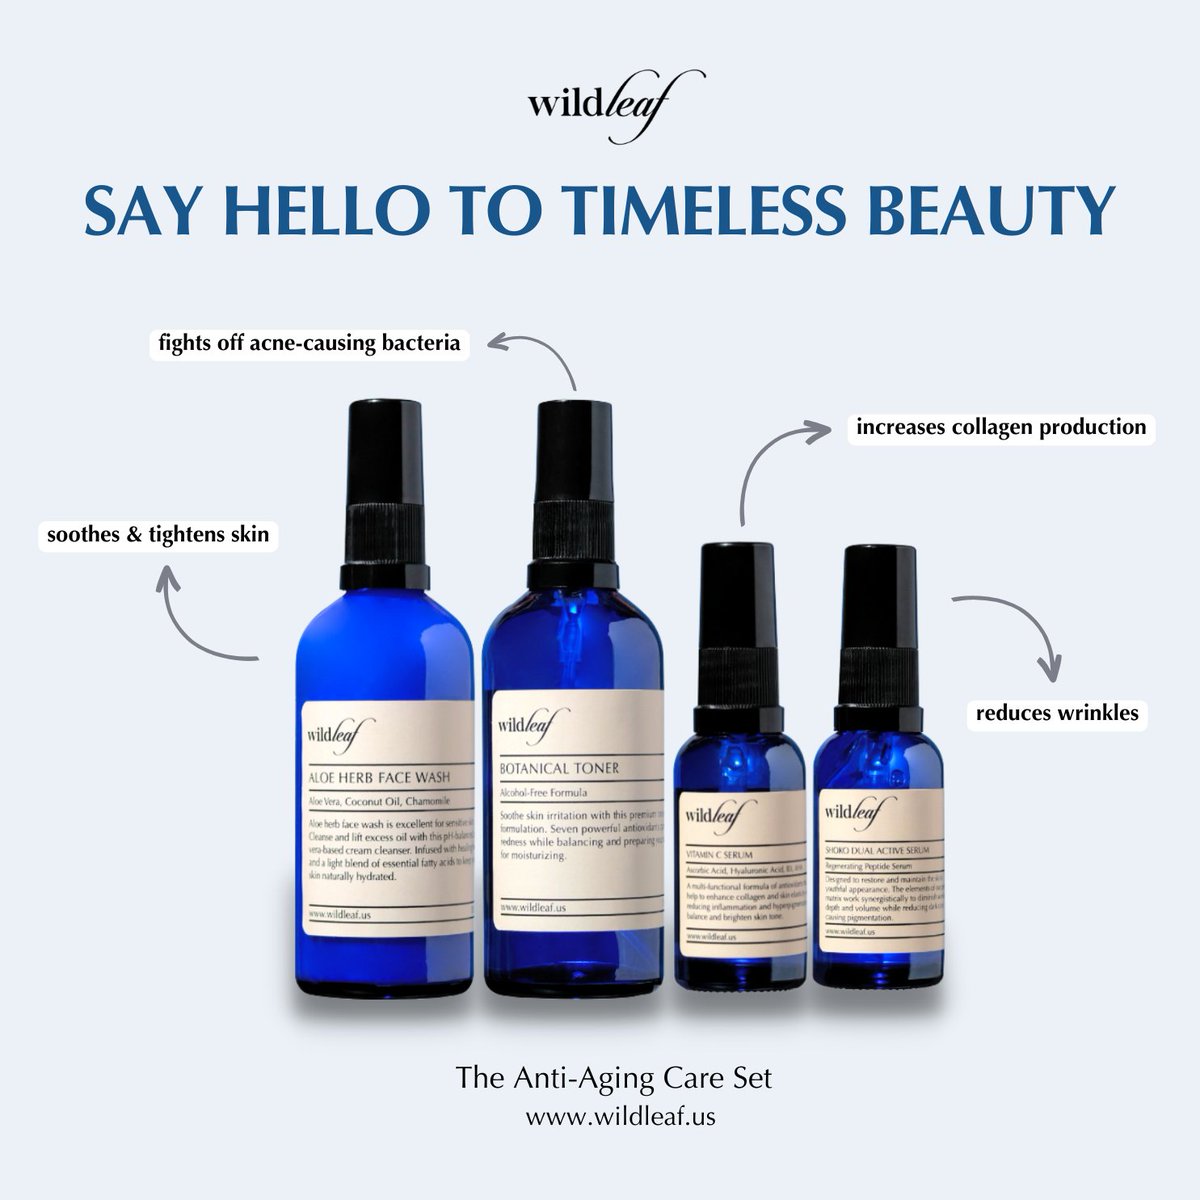 Introducing Wildleaf's very own Fountain of Youth in blue bottles, The Anti-Aging Care Set. 💙

Each bottle holds the promise of a new chapter in your skincare journey. Together, they tell the story of a timeless beauty. 🍃